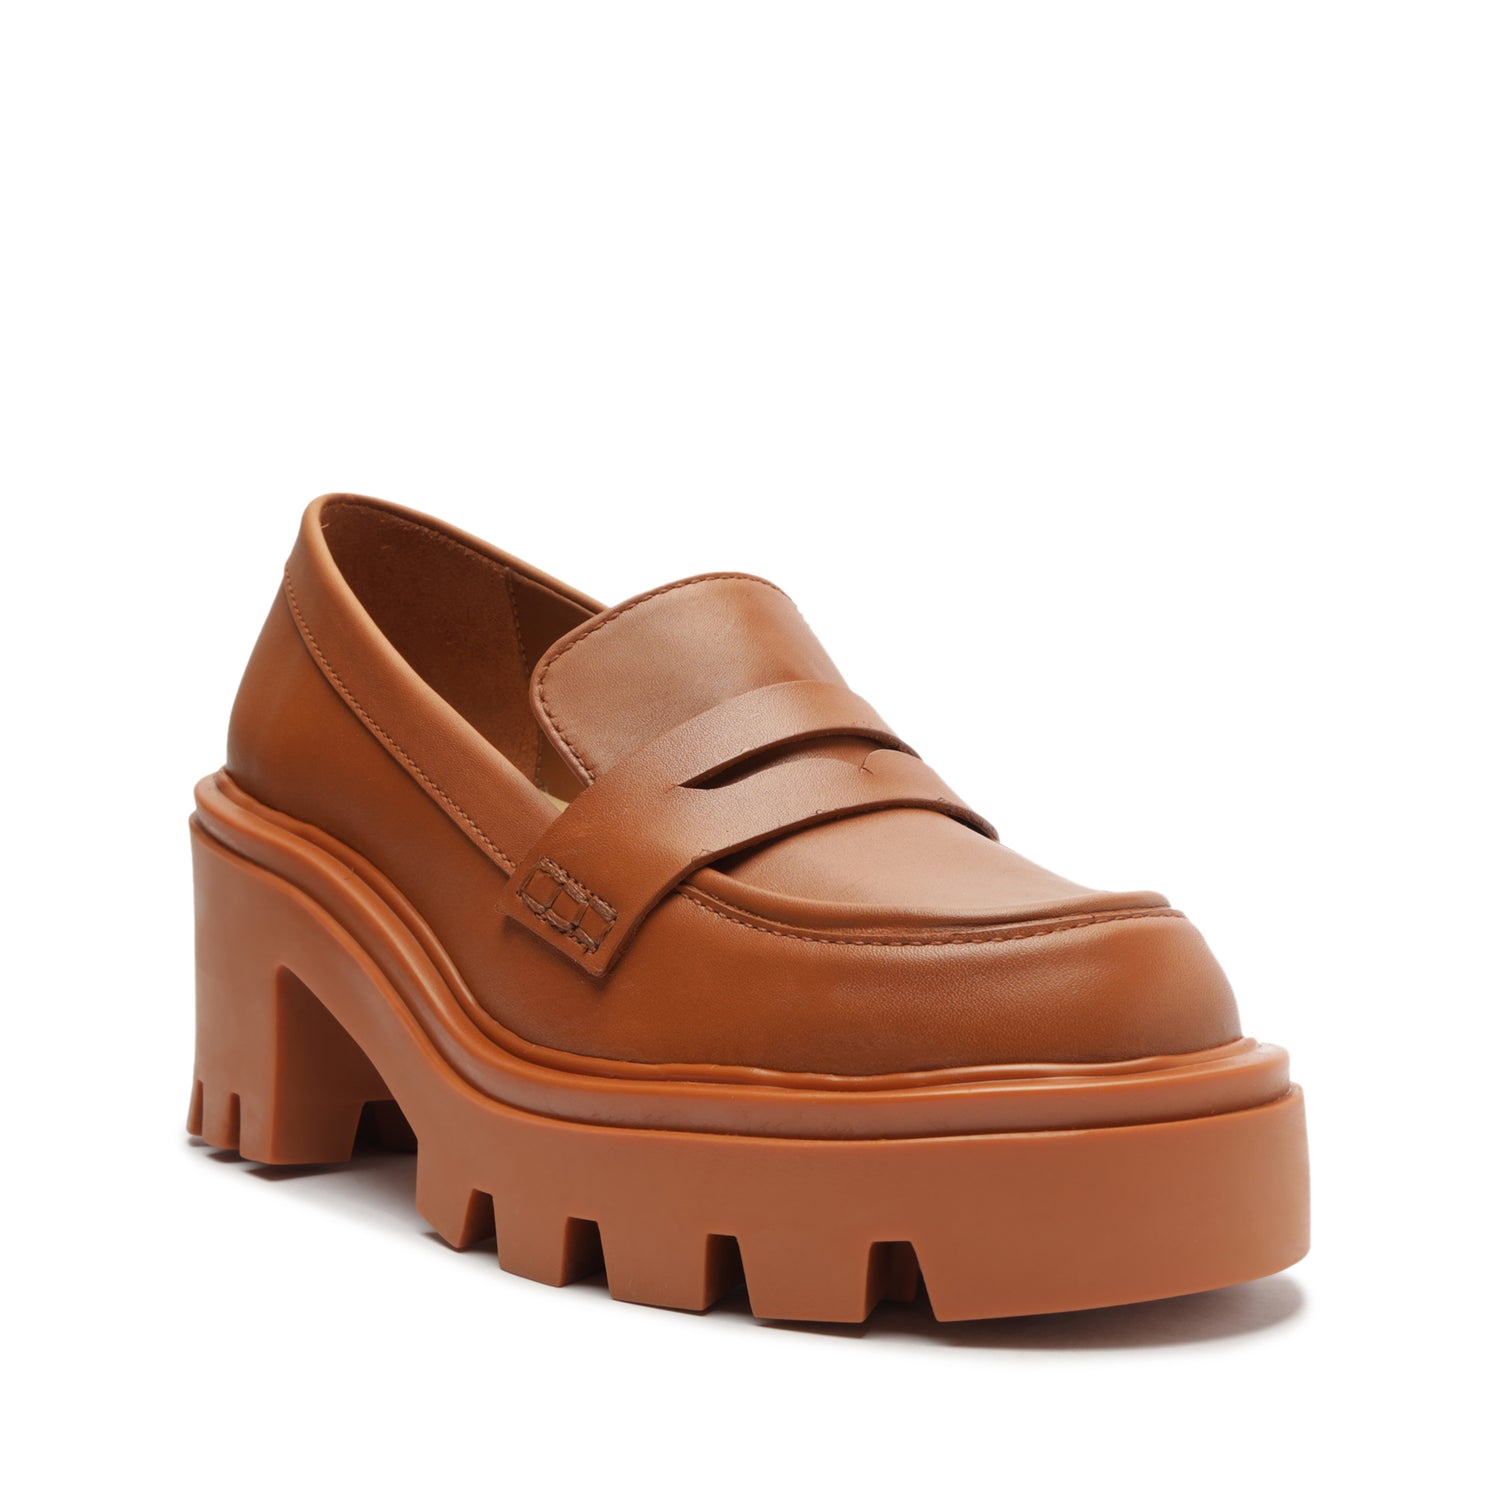 Viola Tractor Leather Flat Honey Peach Leather